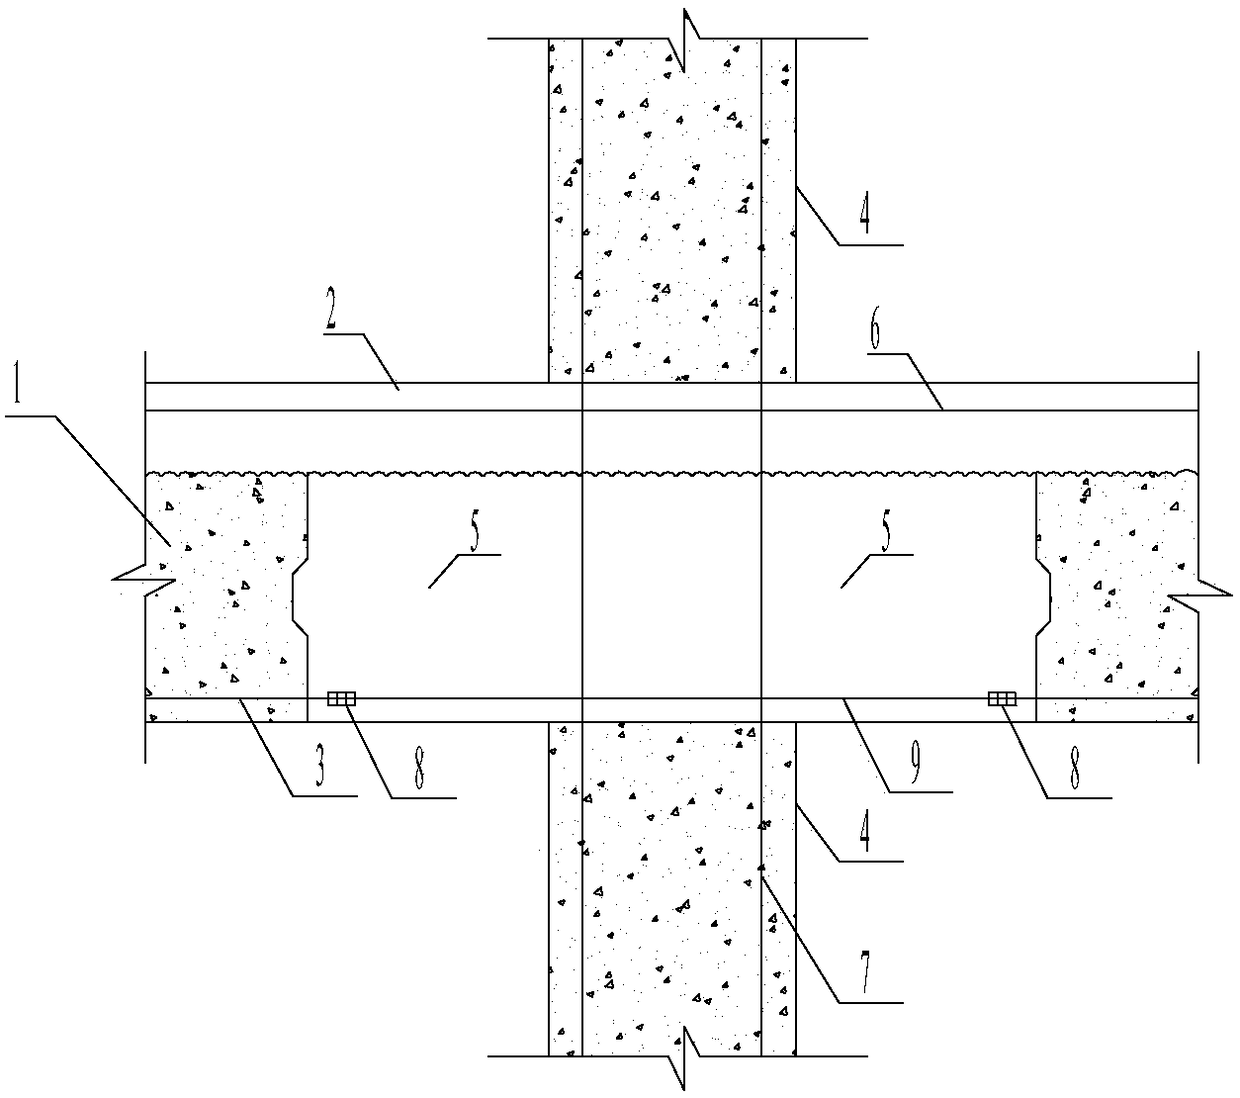 Beam-column joints connecting medium-strength prestressed tendons at the bottom of beams with common steel bar sleeves